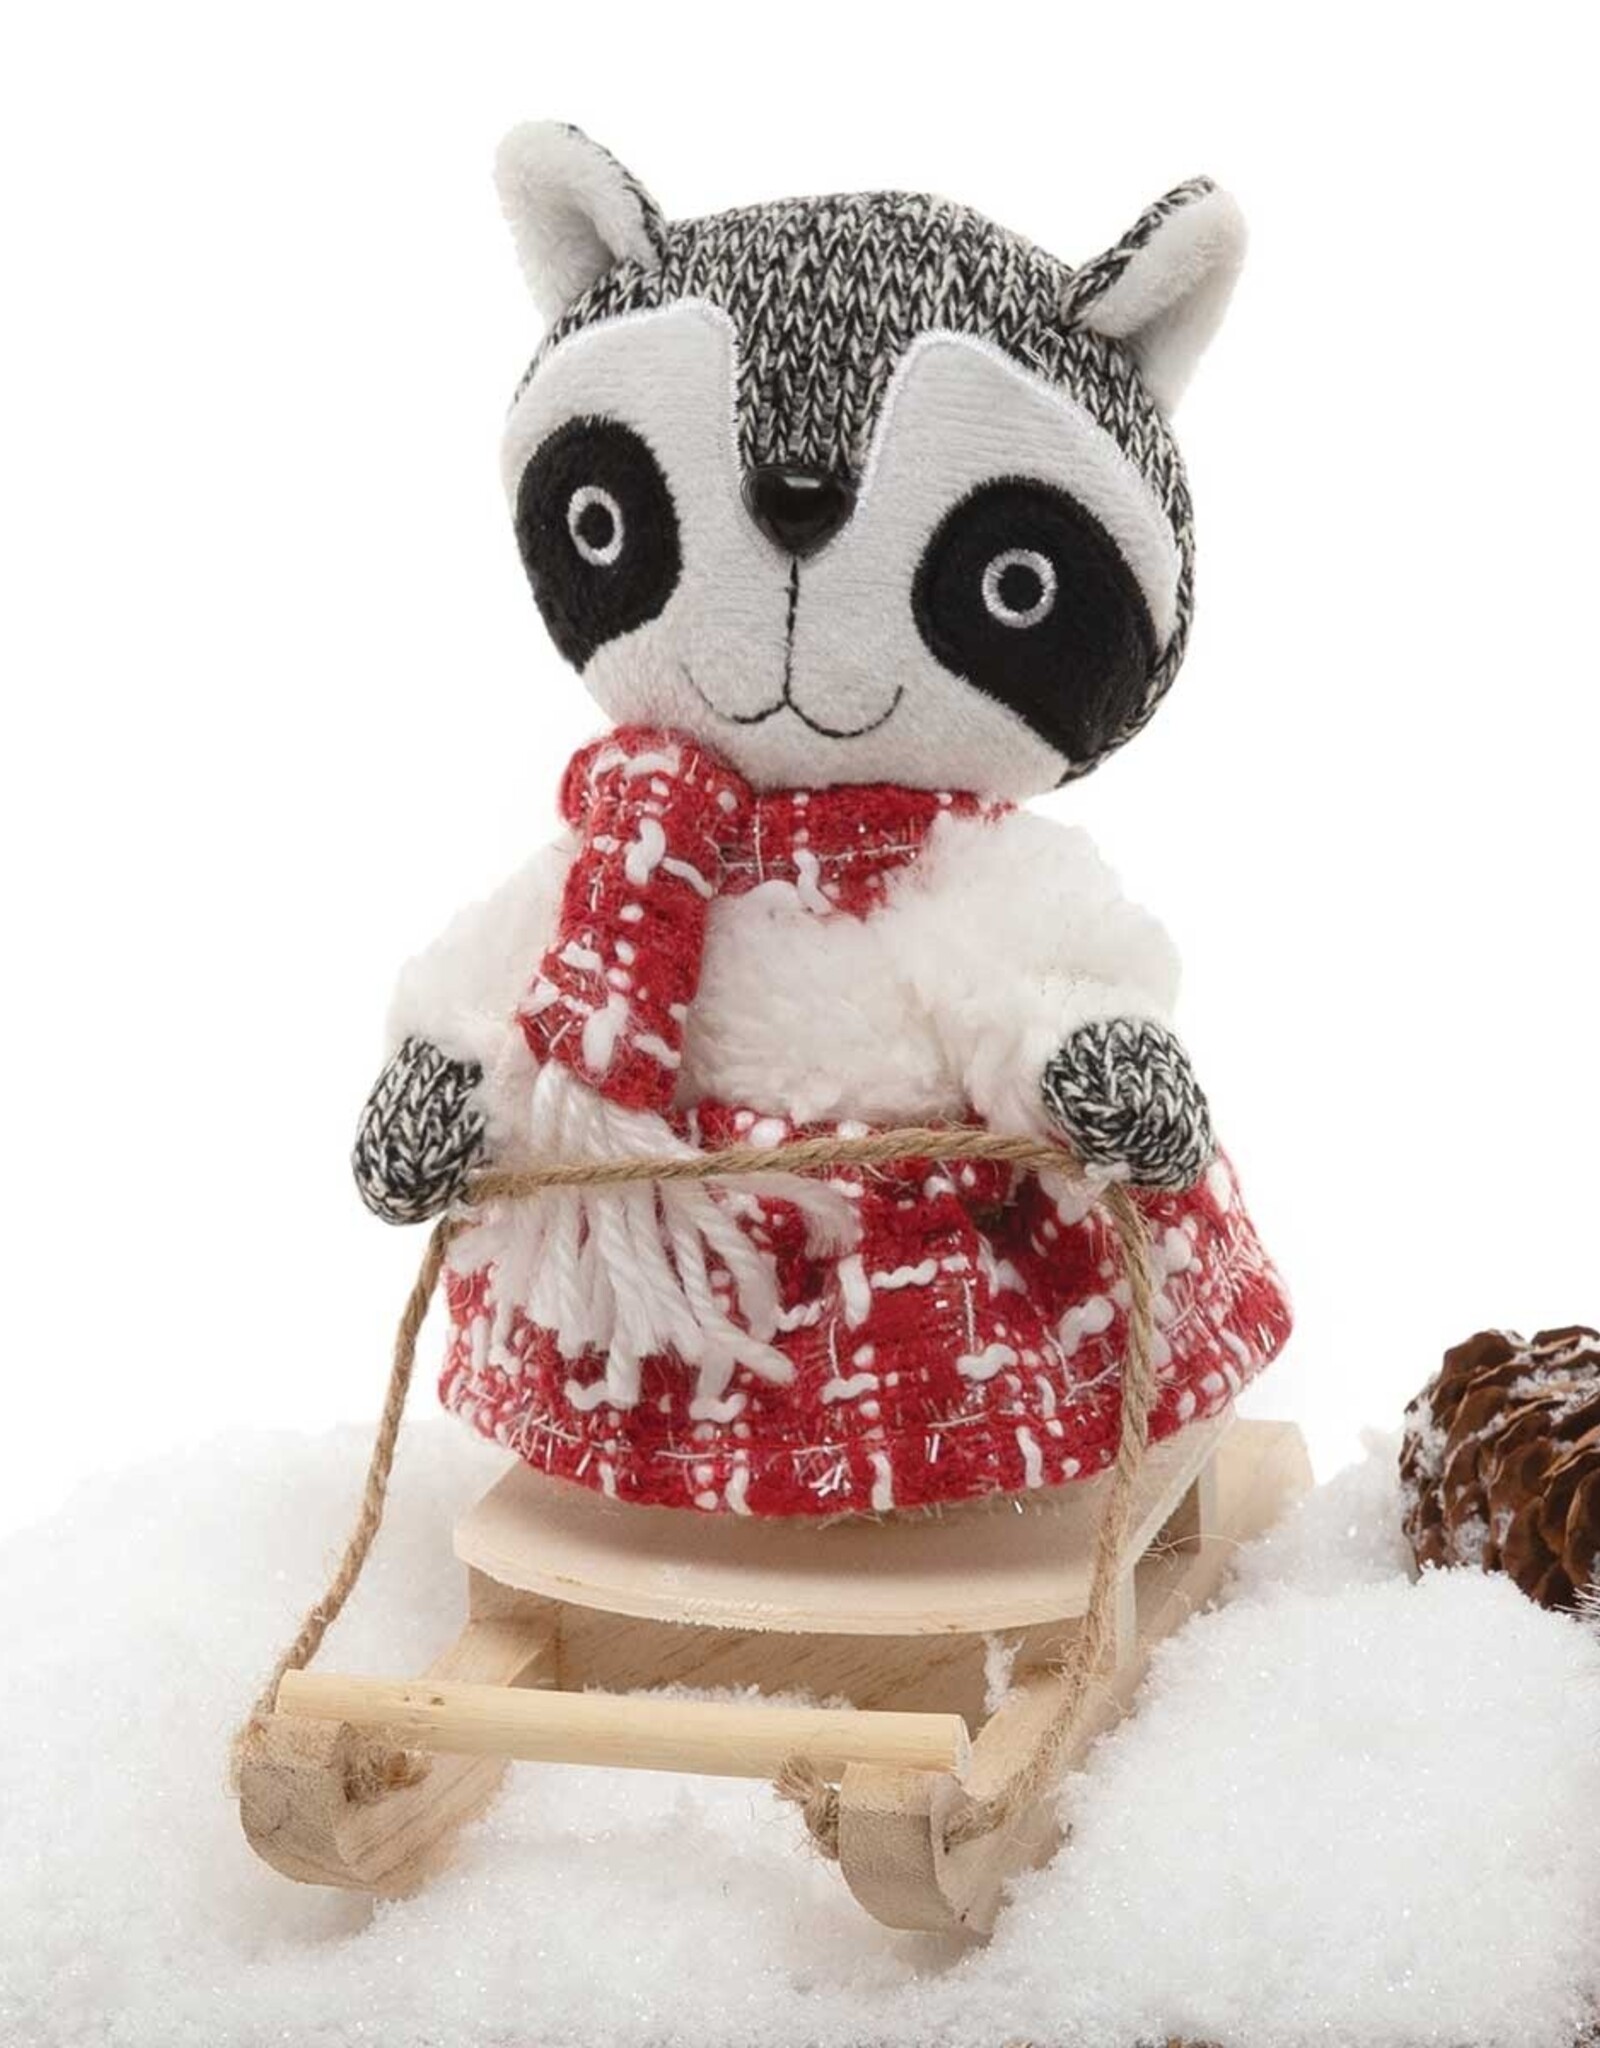 Meravic SALE 6" Racoon Winter Critter on Sled